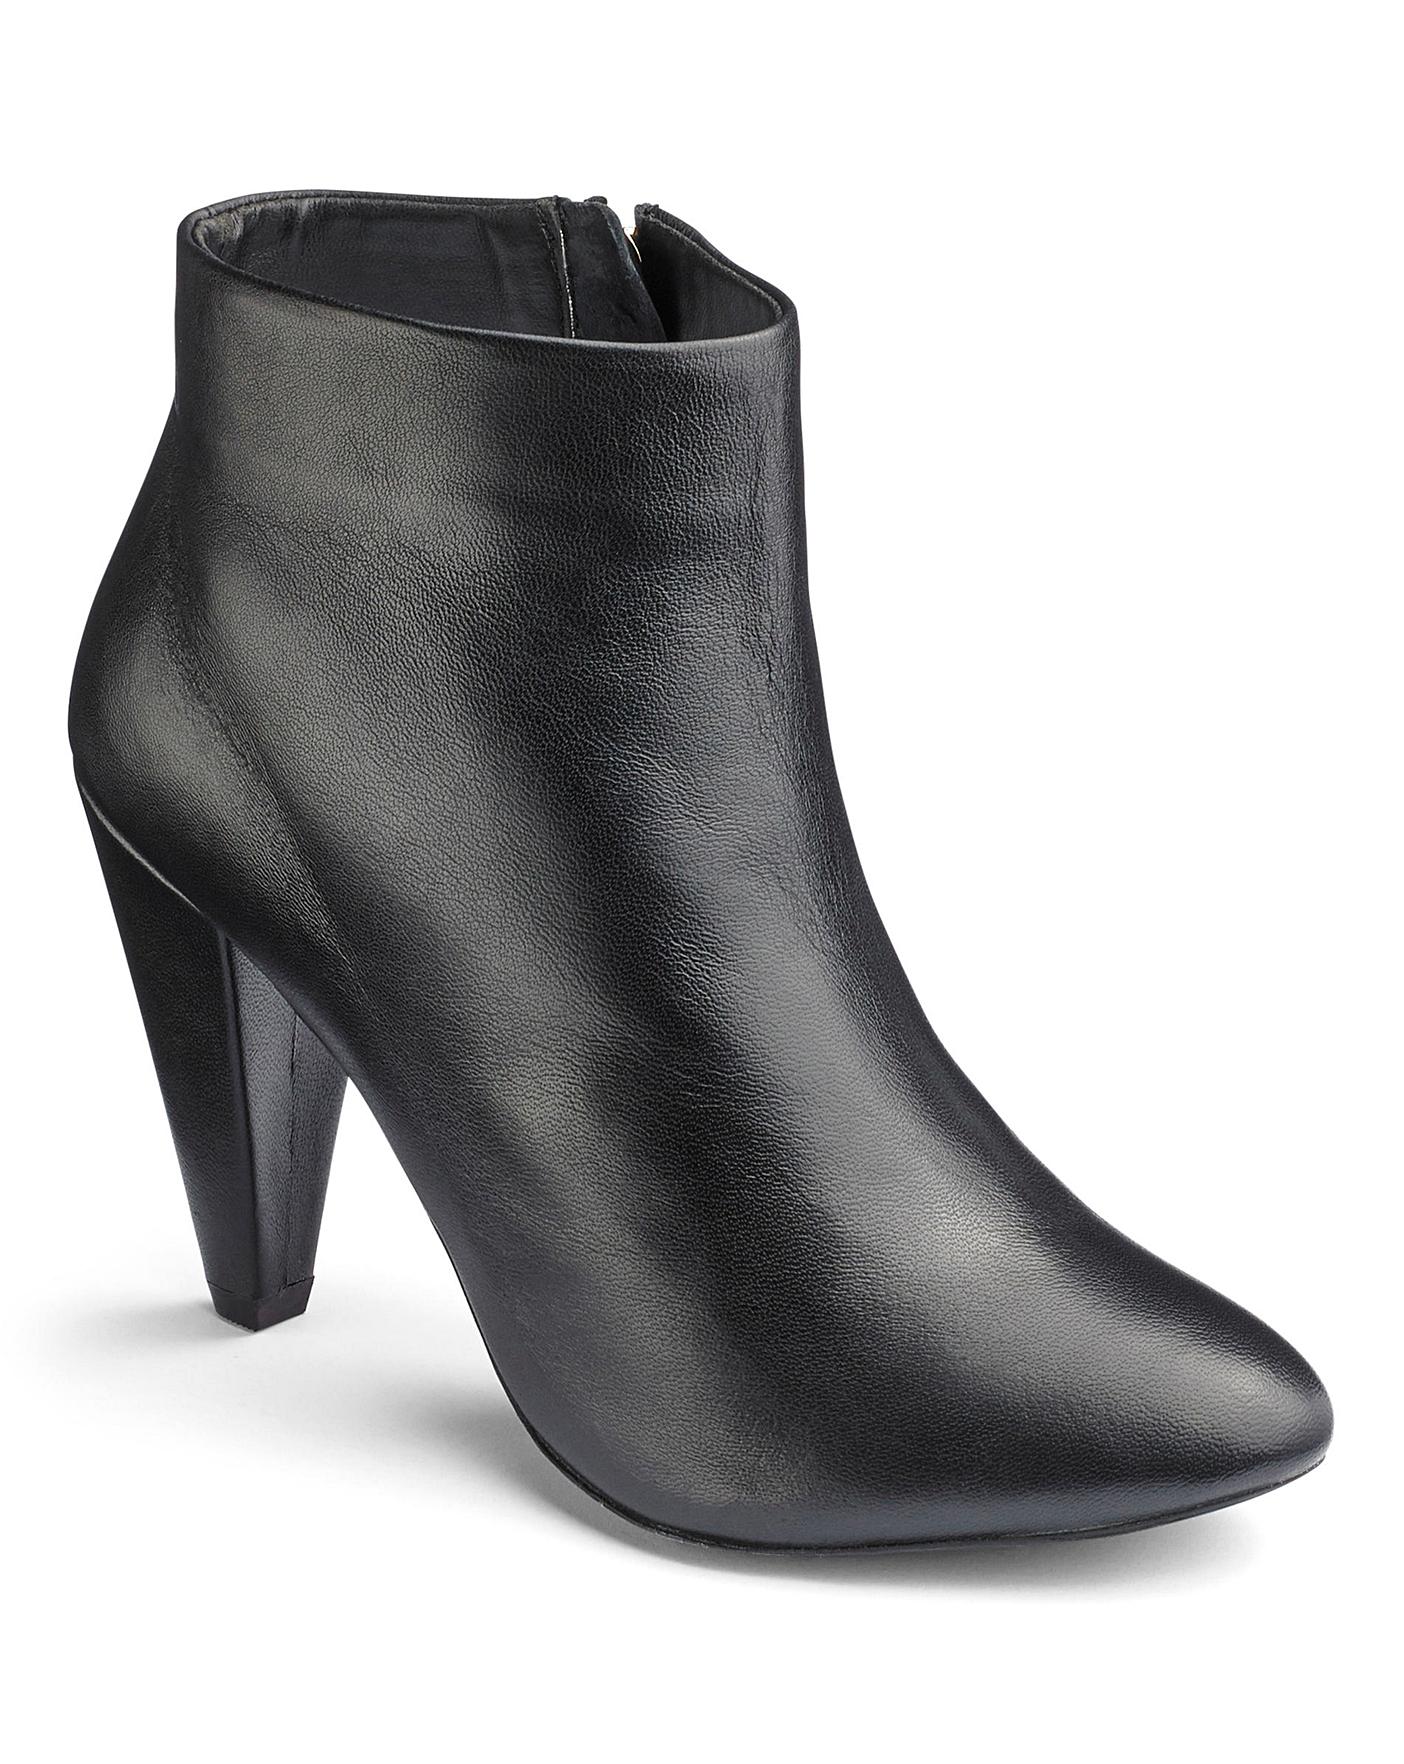 Sole Diva Heeled Ankle Boots E Fit 